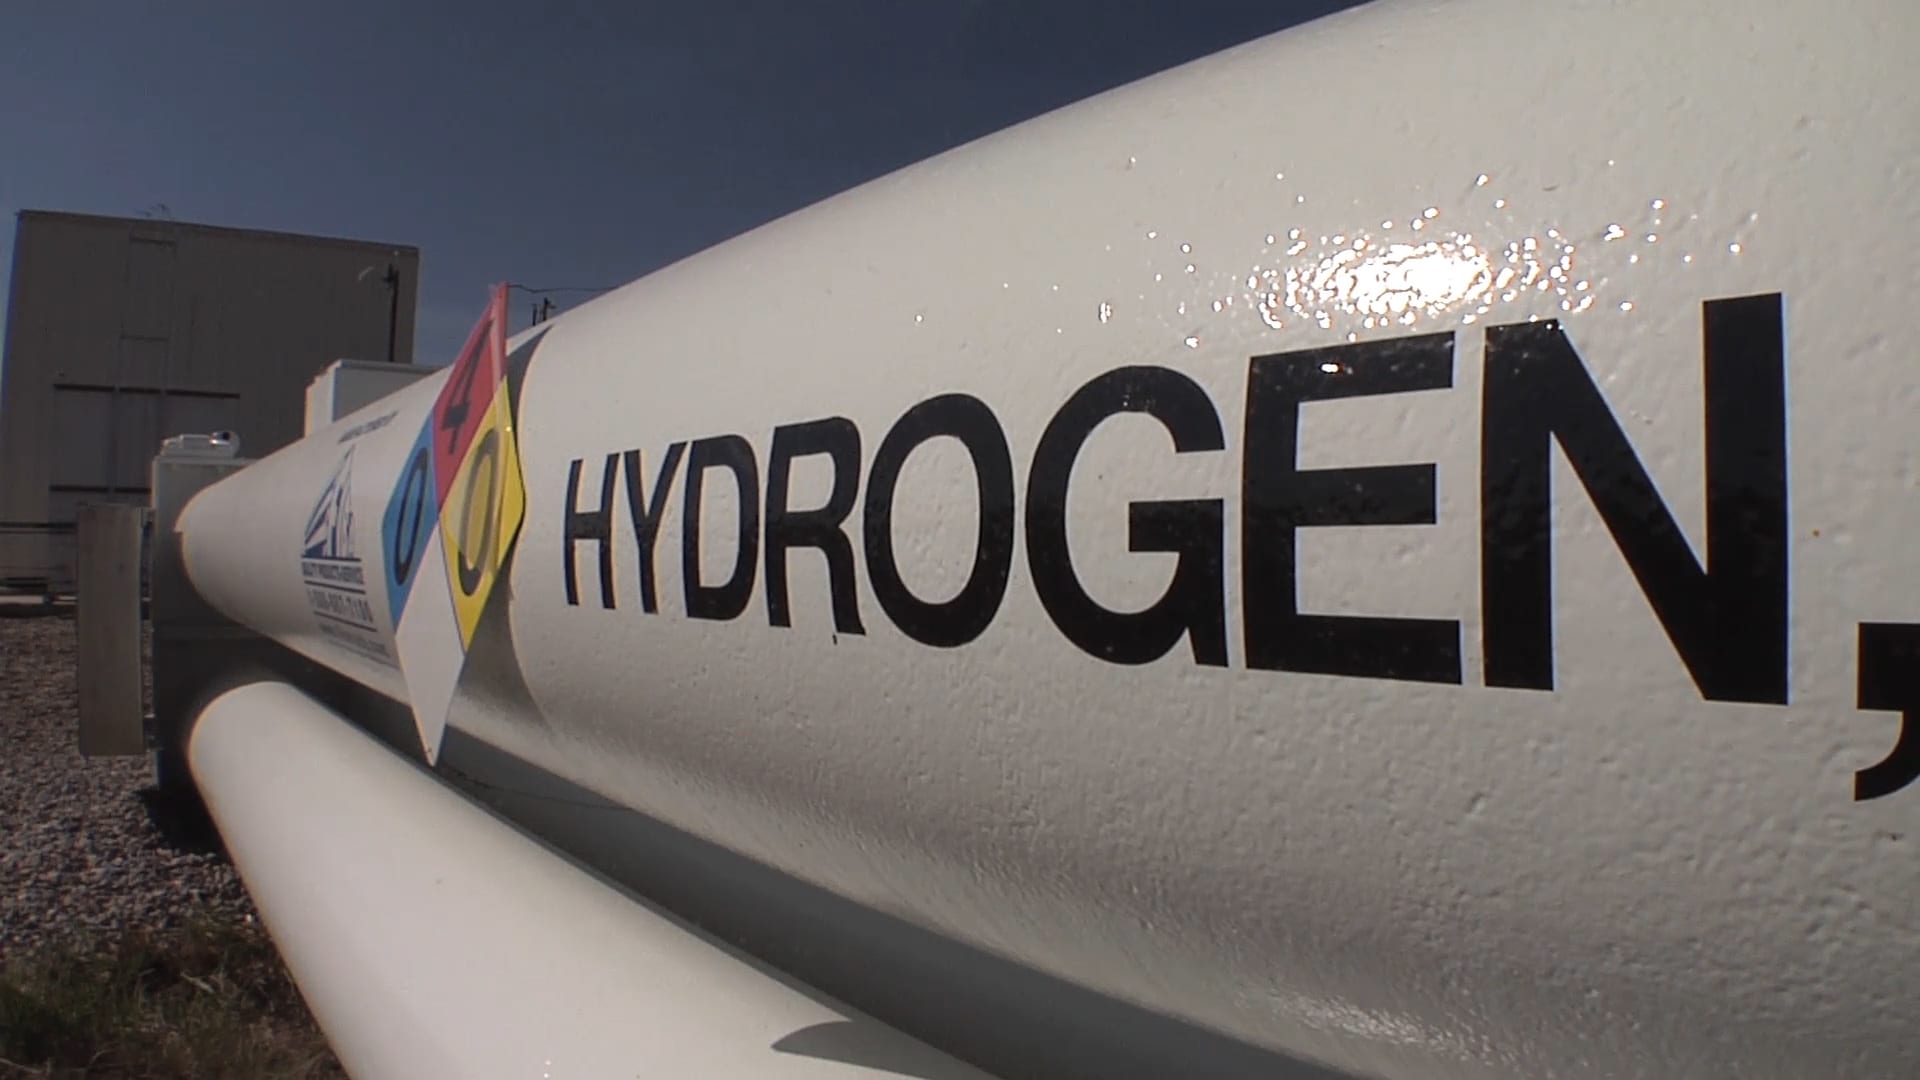 Green hydrogen is gaining traction, but still has massive hurdles to overcome- oil and gas 360